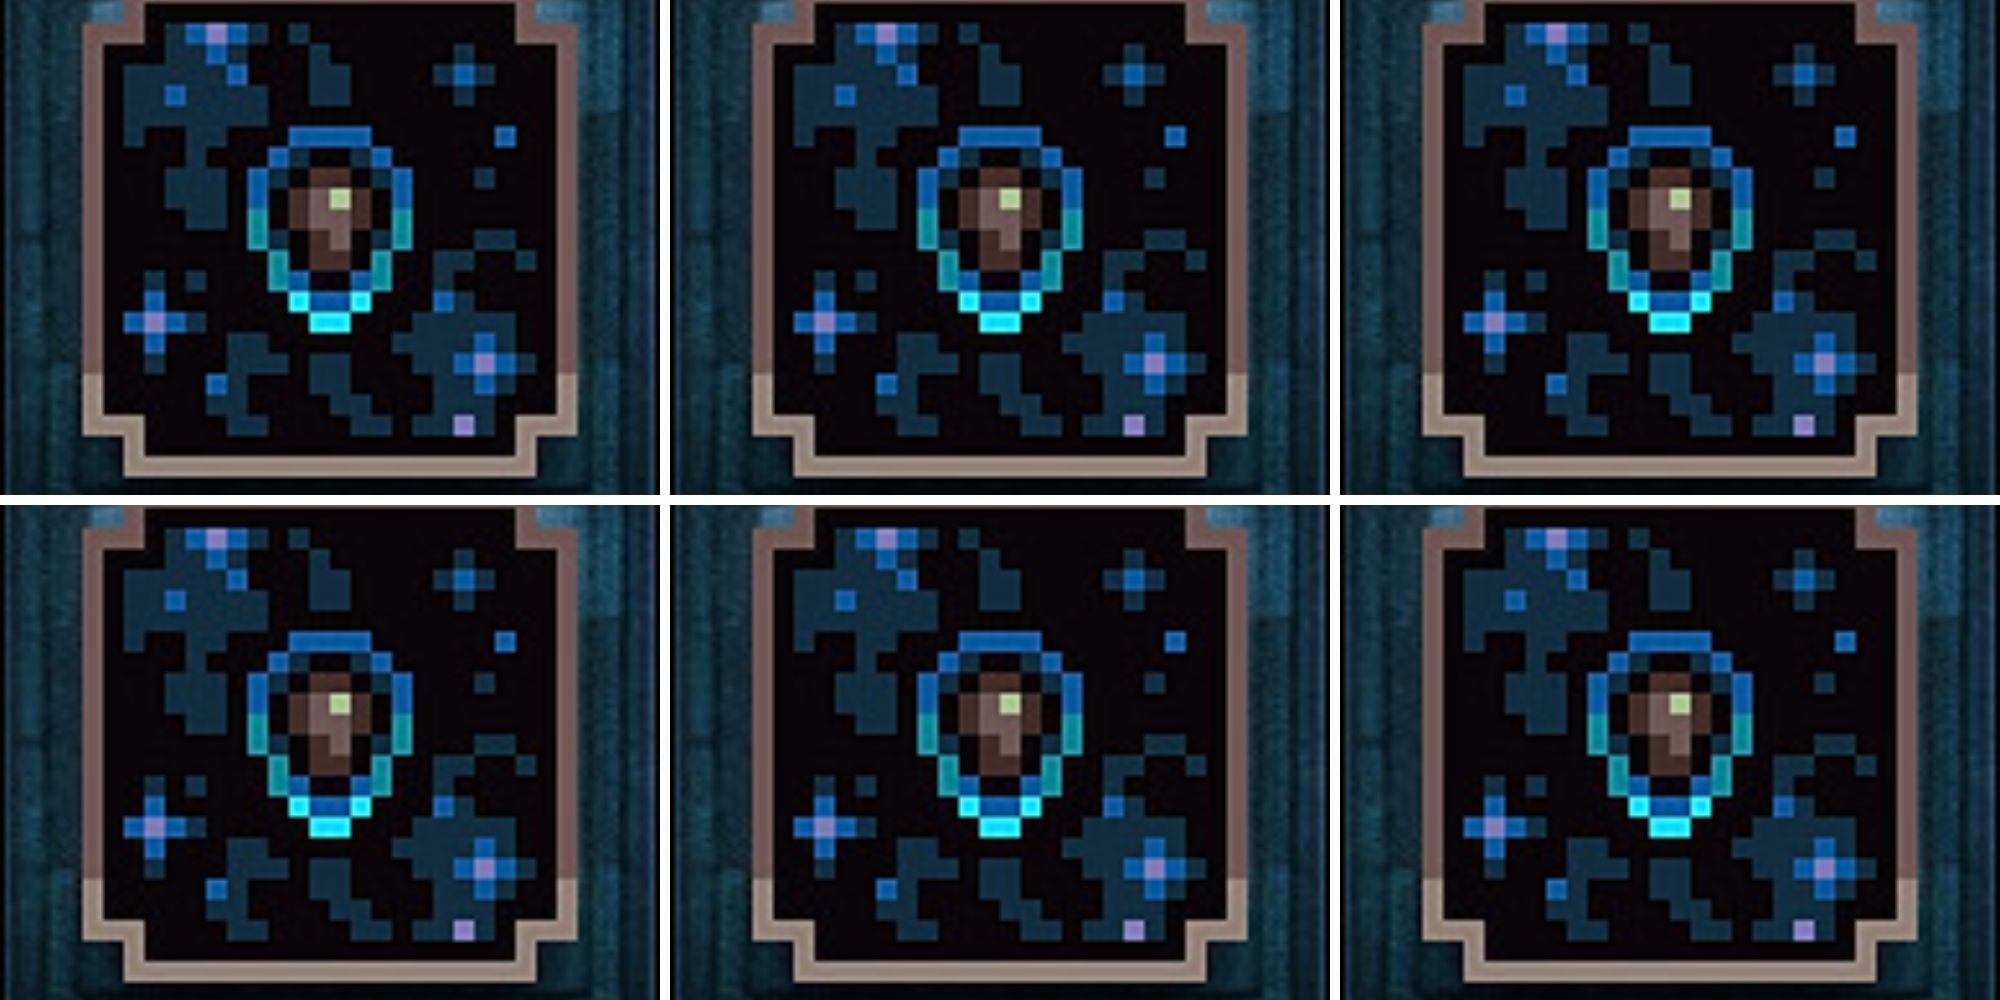 Repeating Black and Blue Rainy Day Background Achievement Pattern.